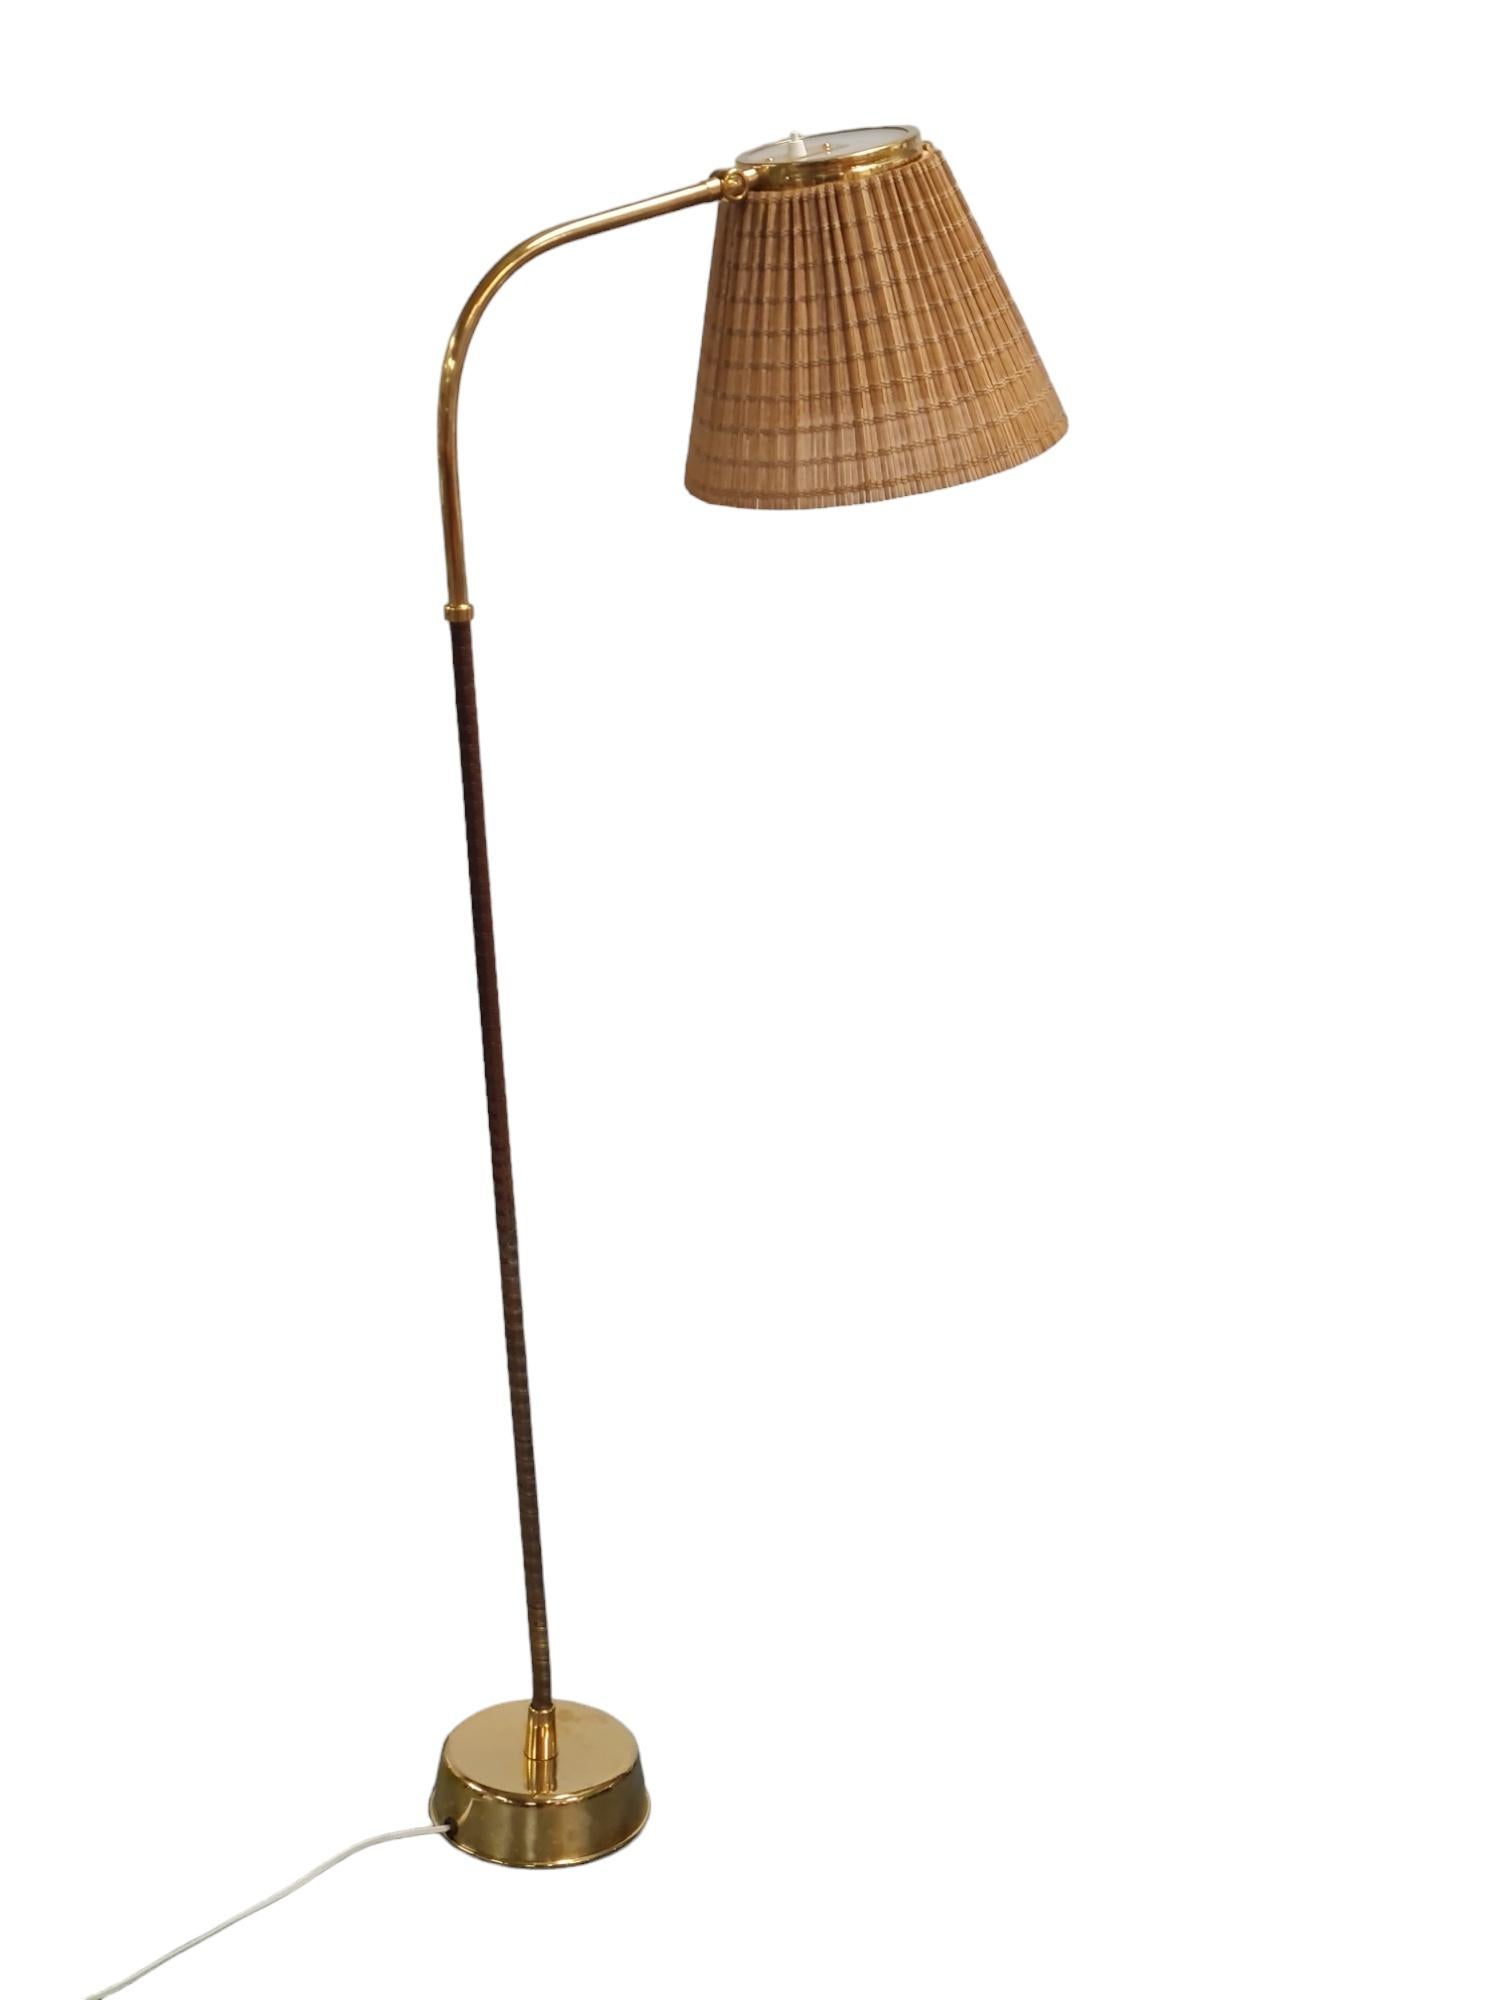 Rare Lisa Johansson-Papé floor lamp model. 2063 with adjustable rattan shade and bent leg in brass and black nylon. Manufactured in Finland by Orno in the 1950s. This lamp is one of the most sought after models designed by Lisa Johansson-Papé. The